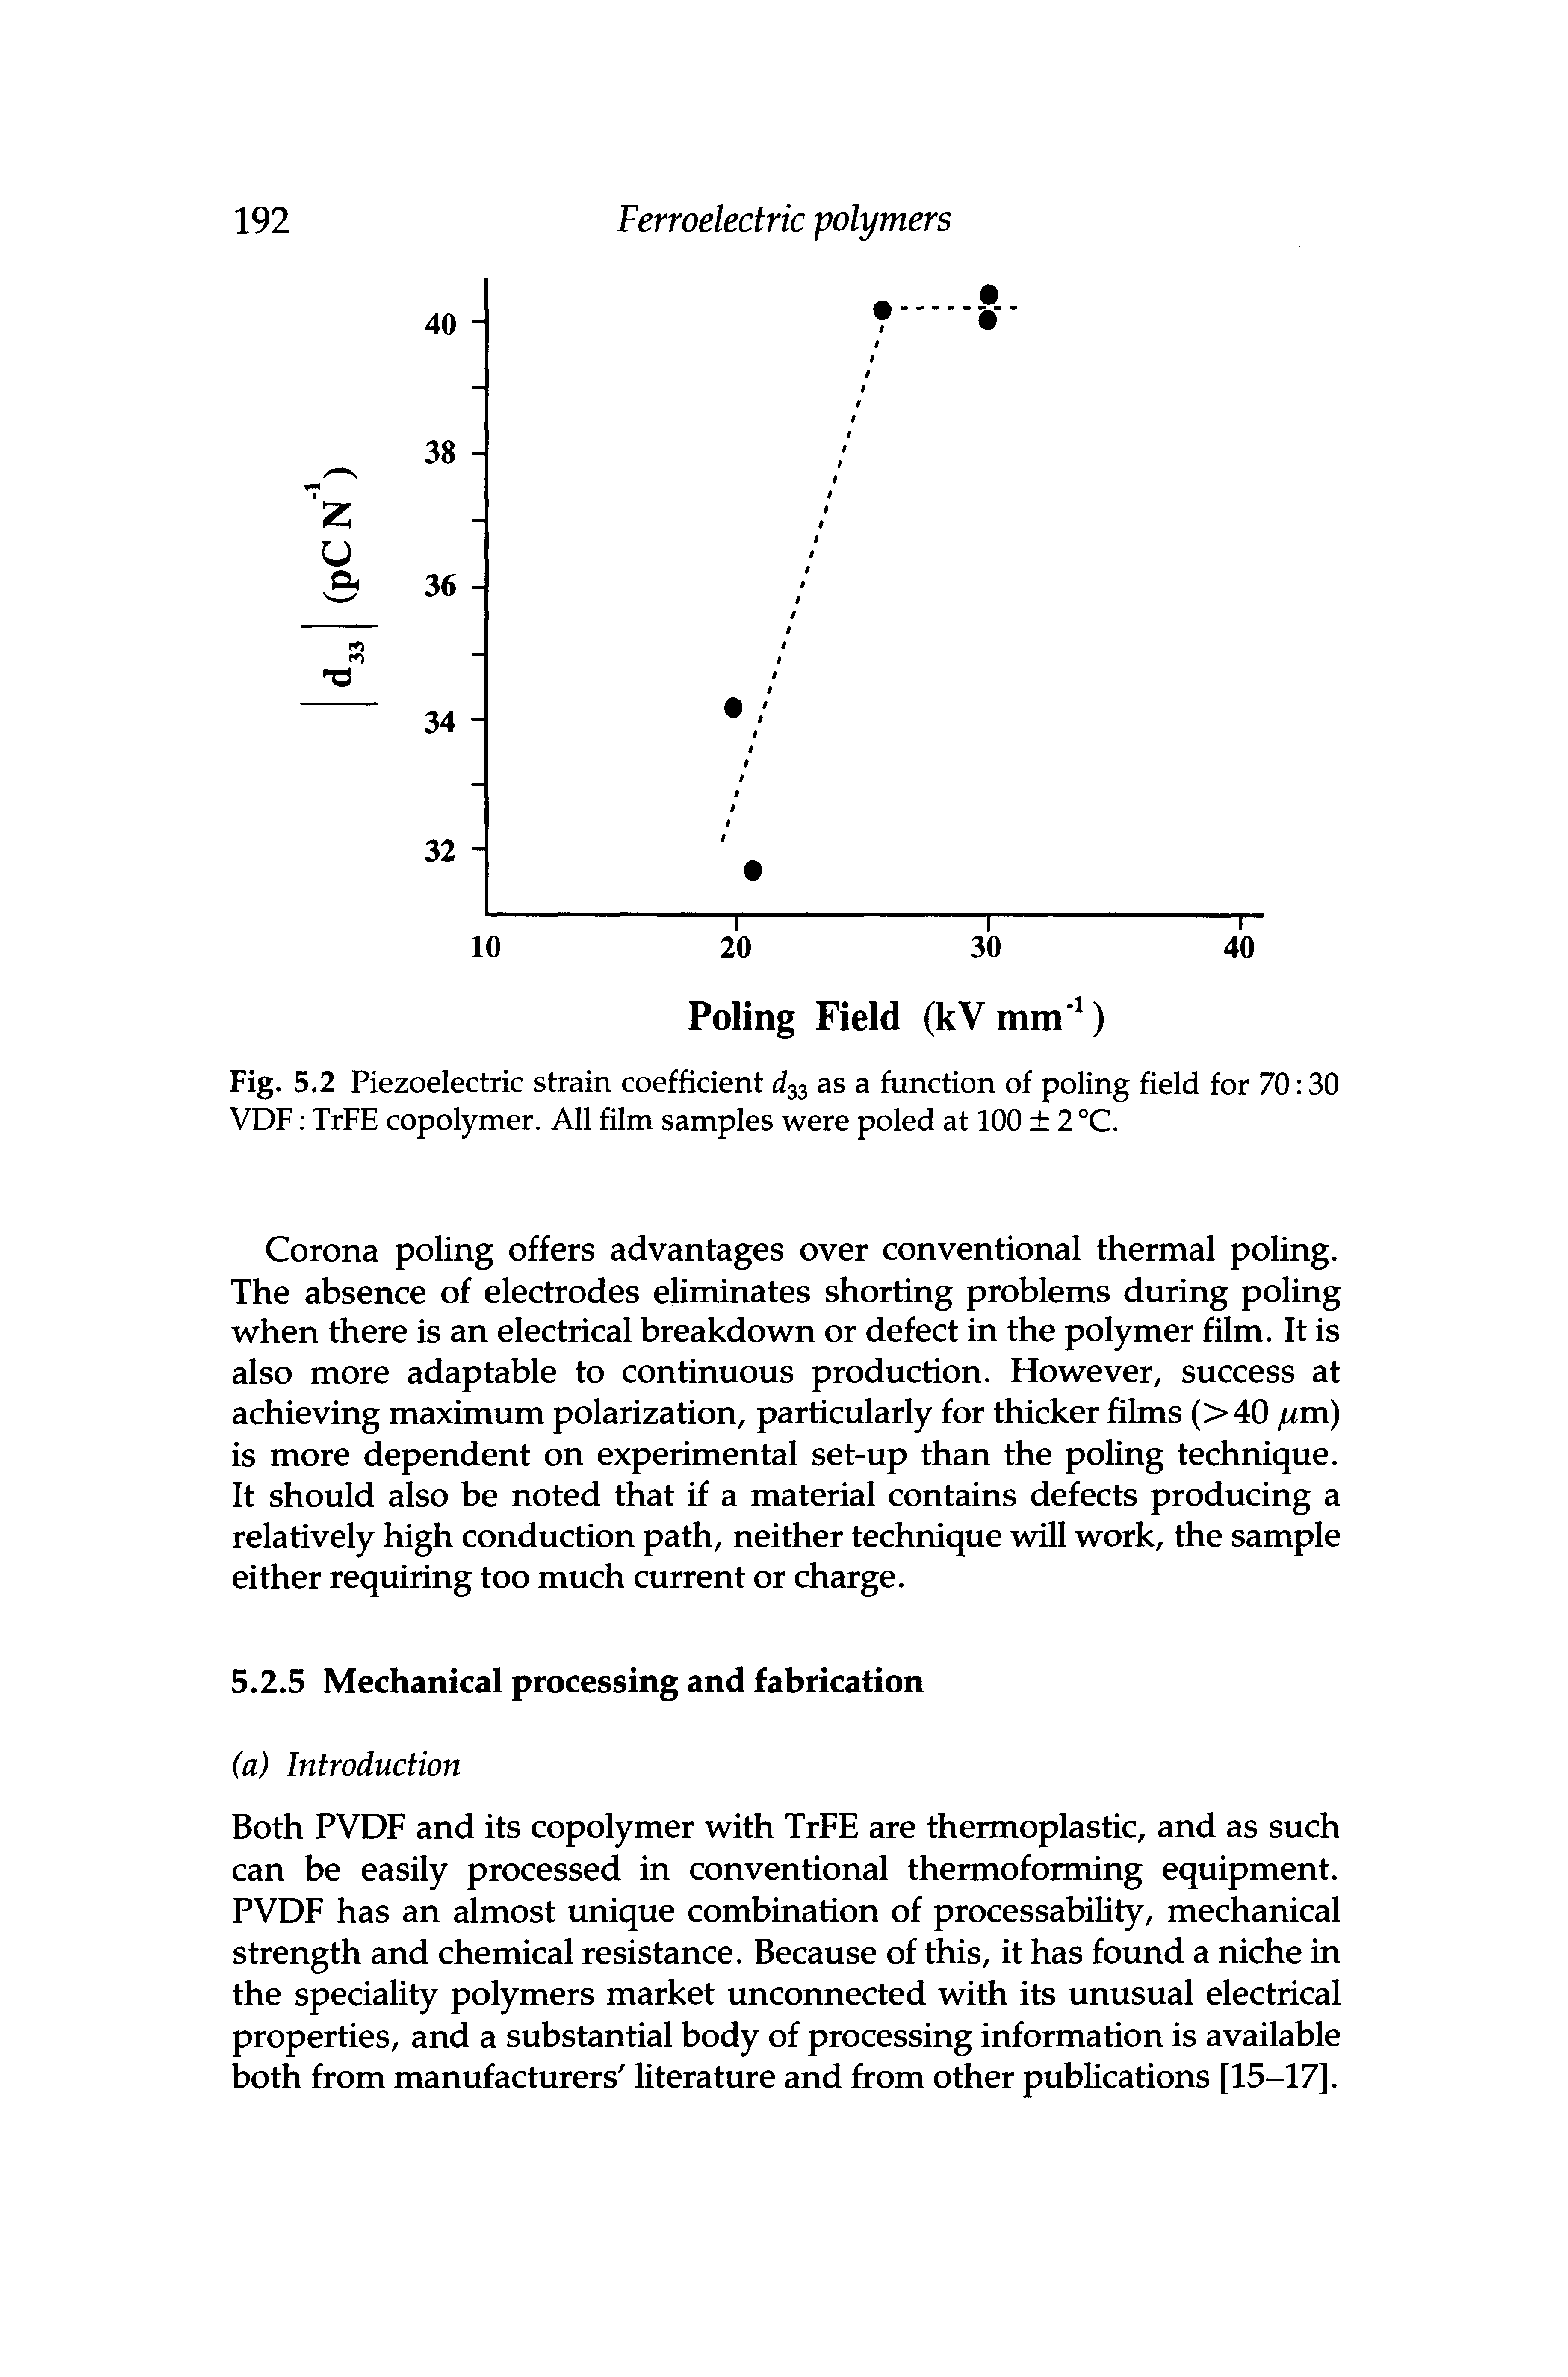 Fig. 5.2 Piezoelectric strain coefficient as a function of poling field for 70 30 VDF TrFE copolymer. All film samples were poled at 100 2°C.